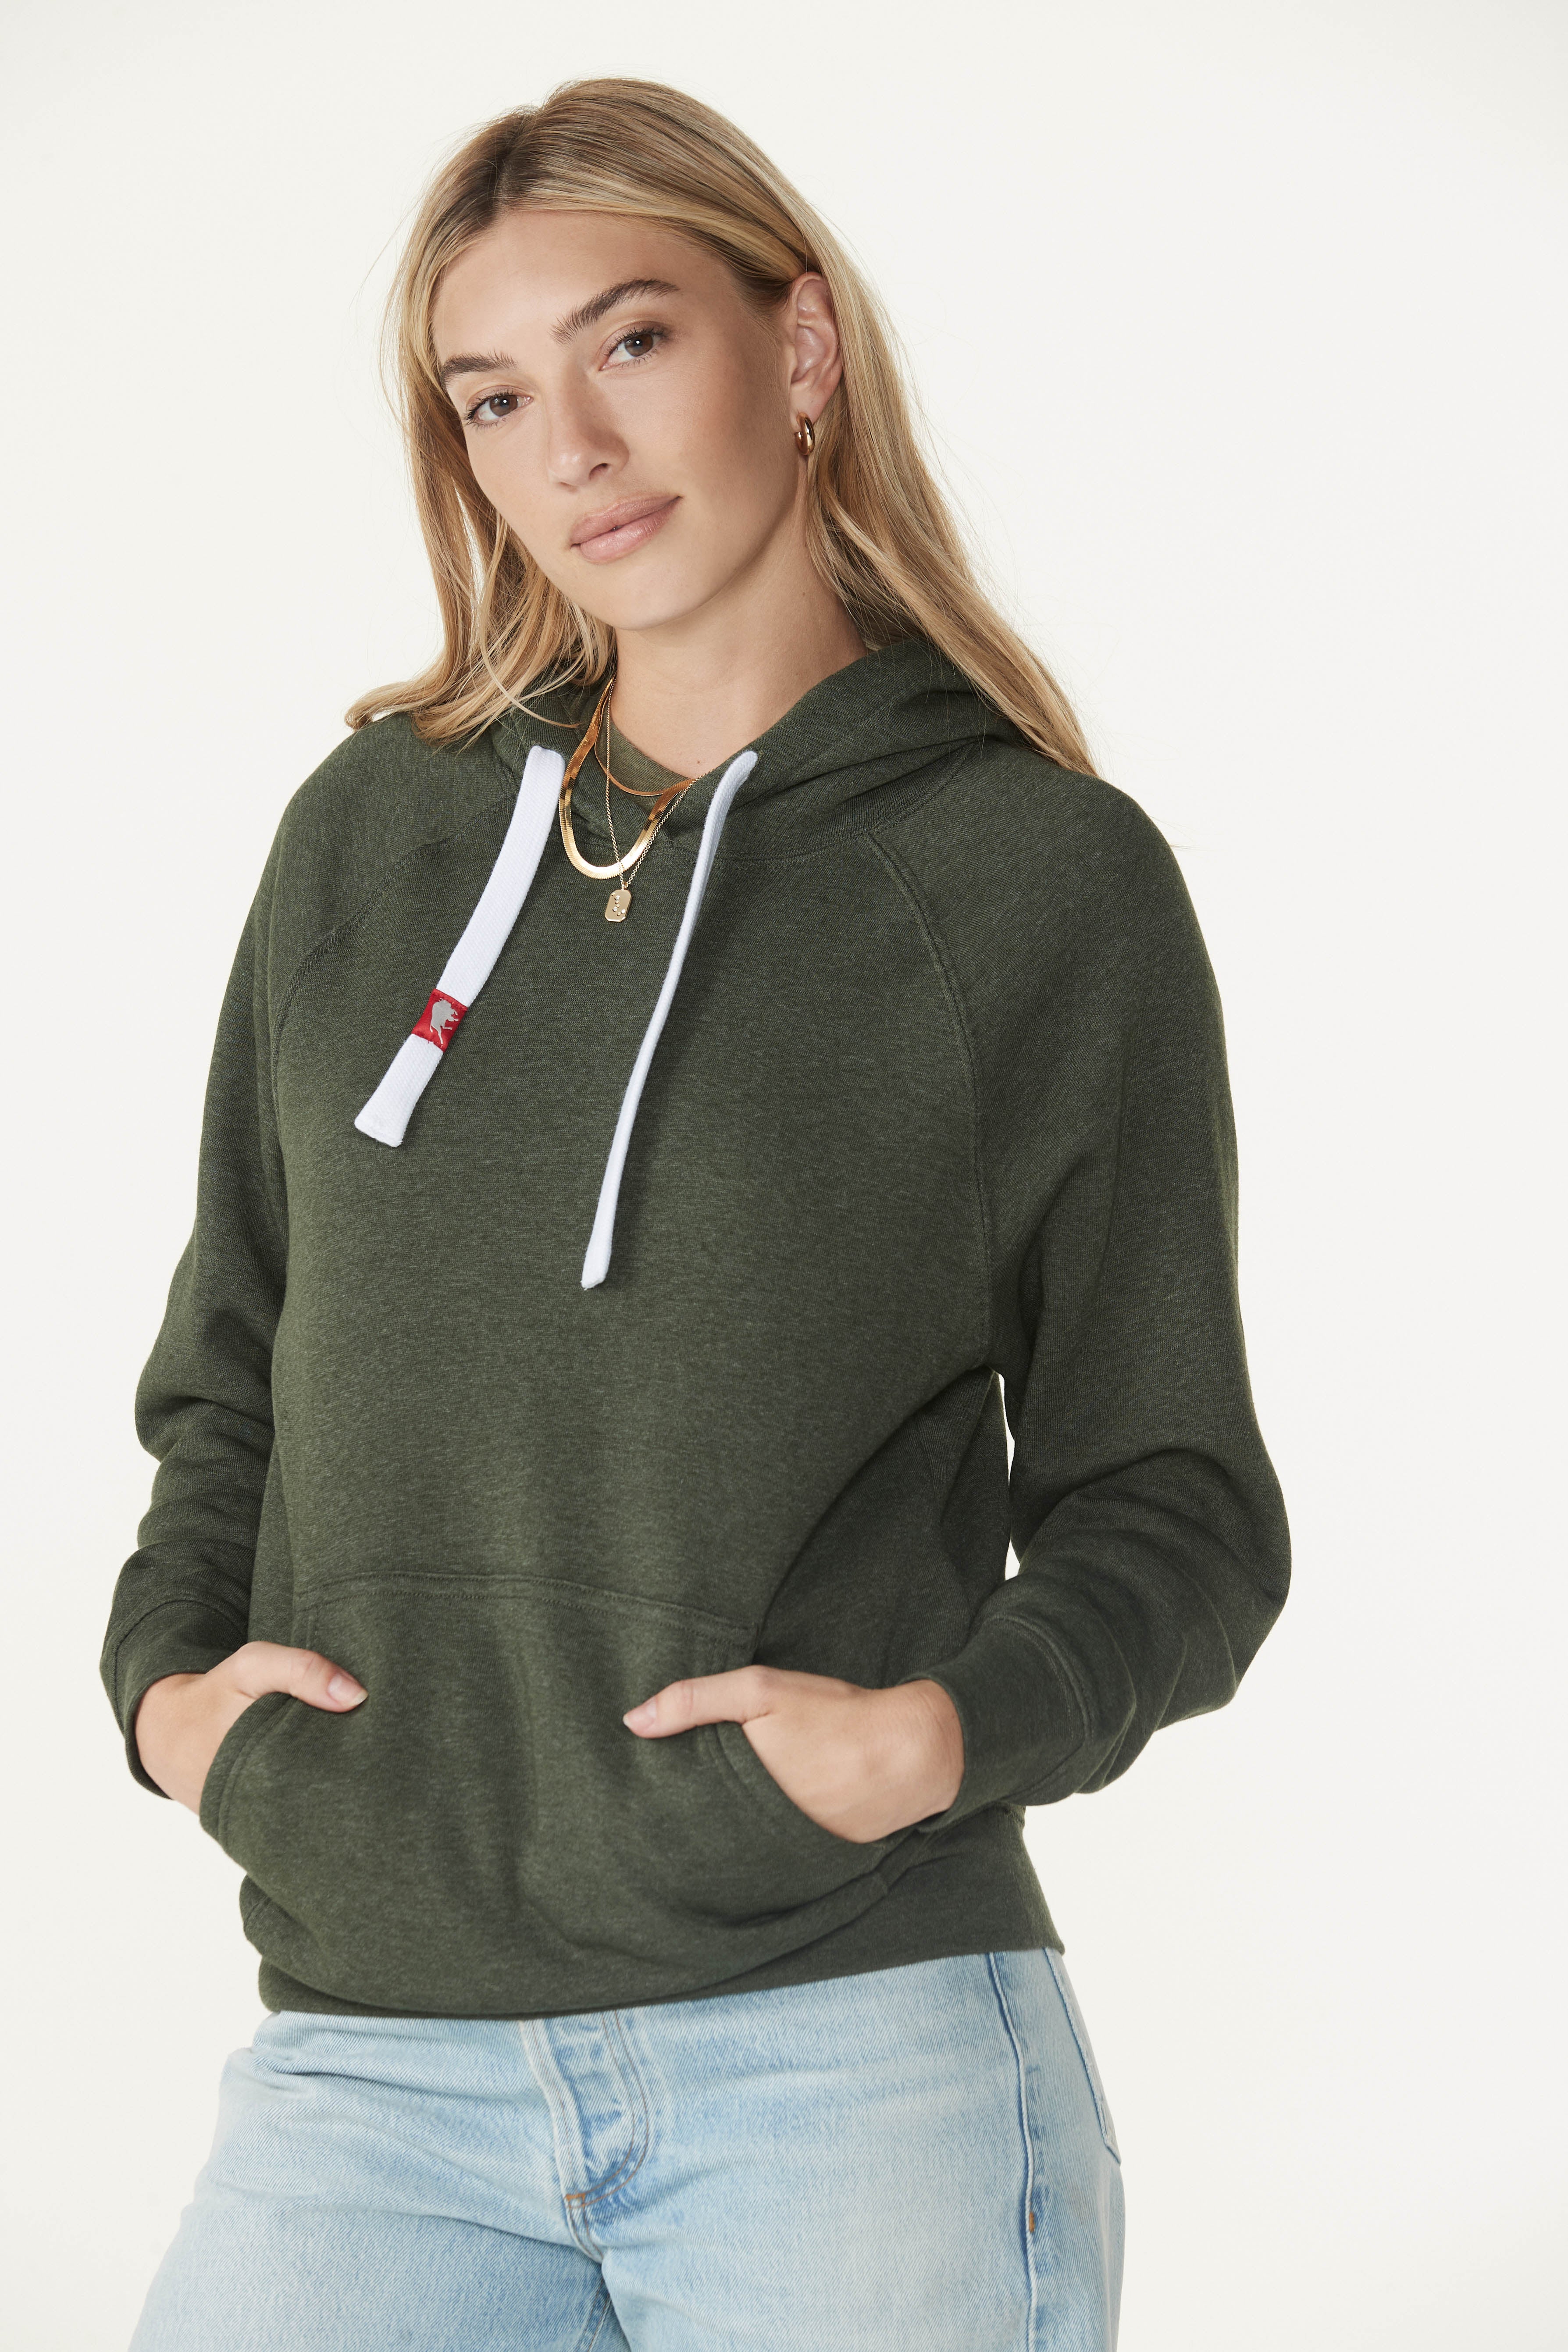 Grey Blue Womens Sweatshirt Hoodie With Dwv9402 Fleece Dust Bag XS L Sizes  Available 20439 From Dysoon, $58.74